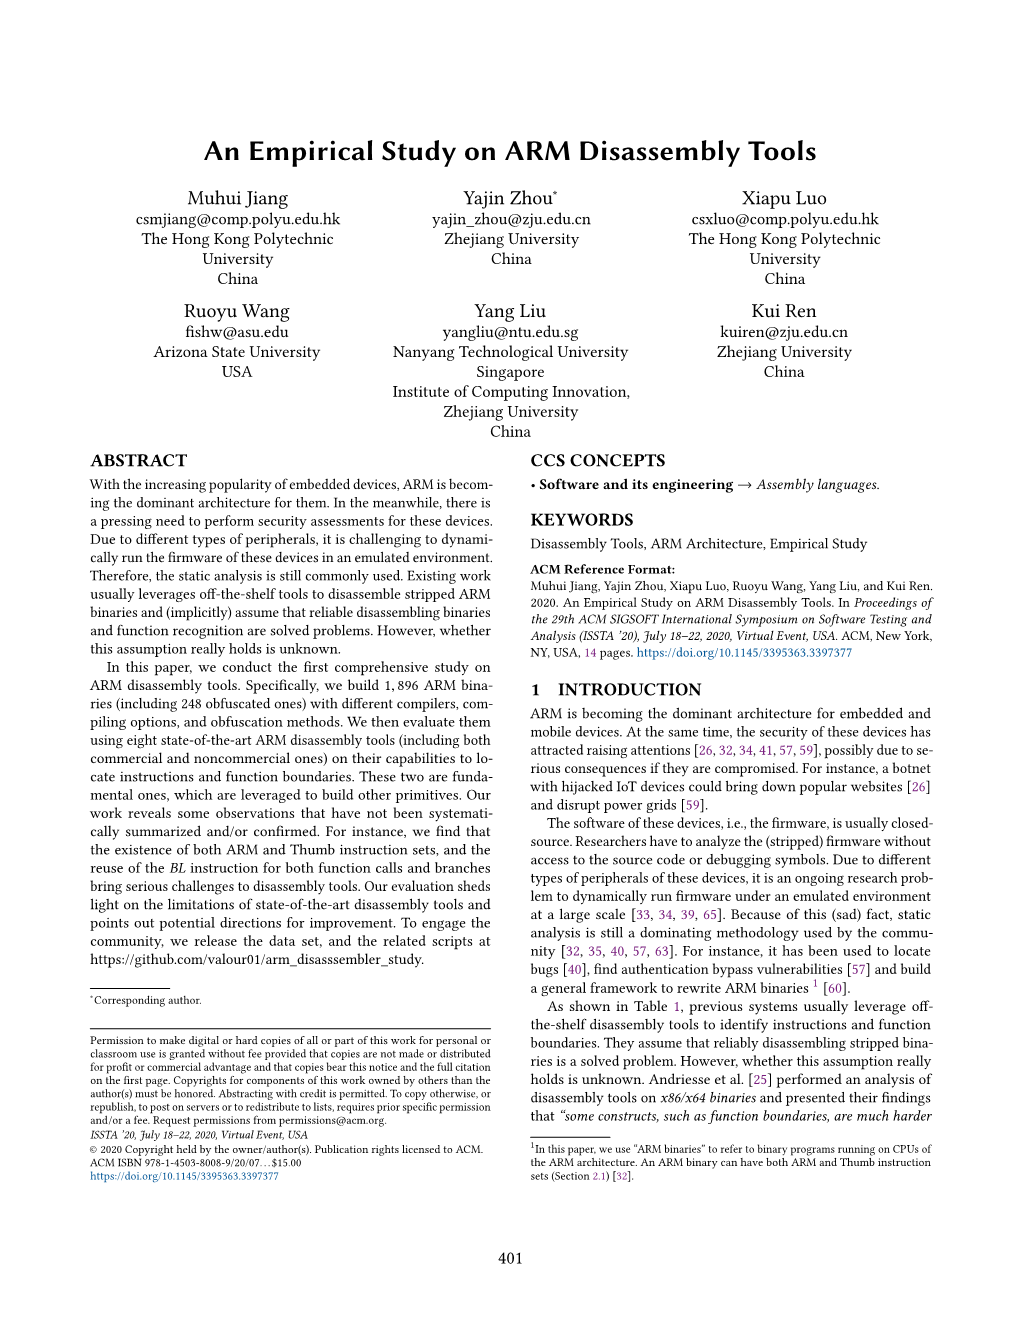 An Empirical Study on ARM Disassembly Tools